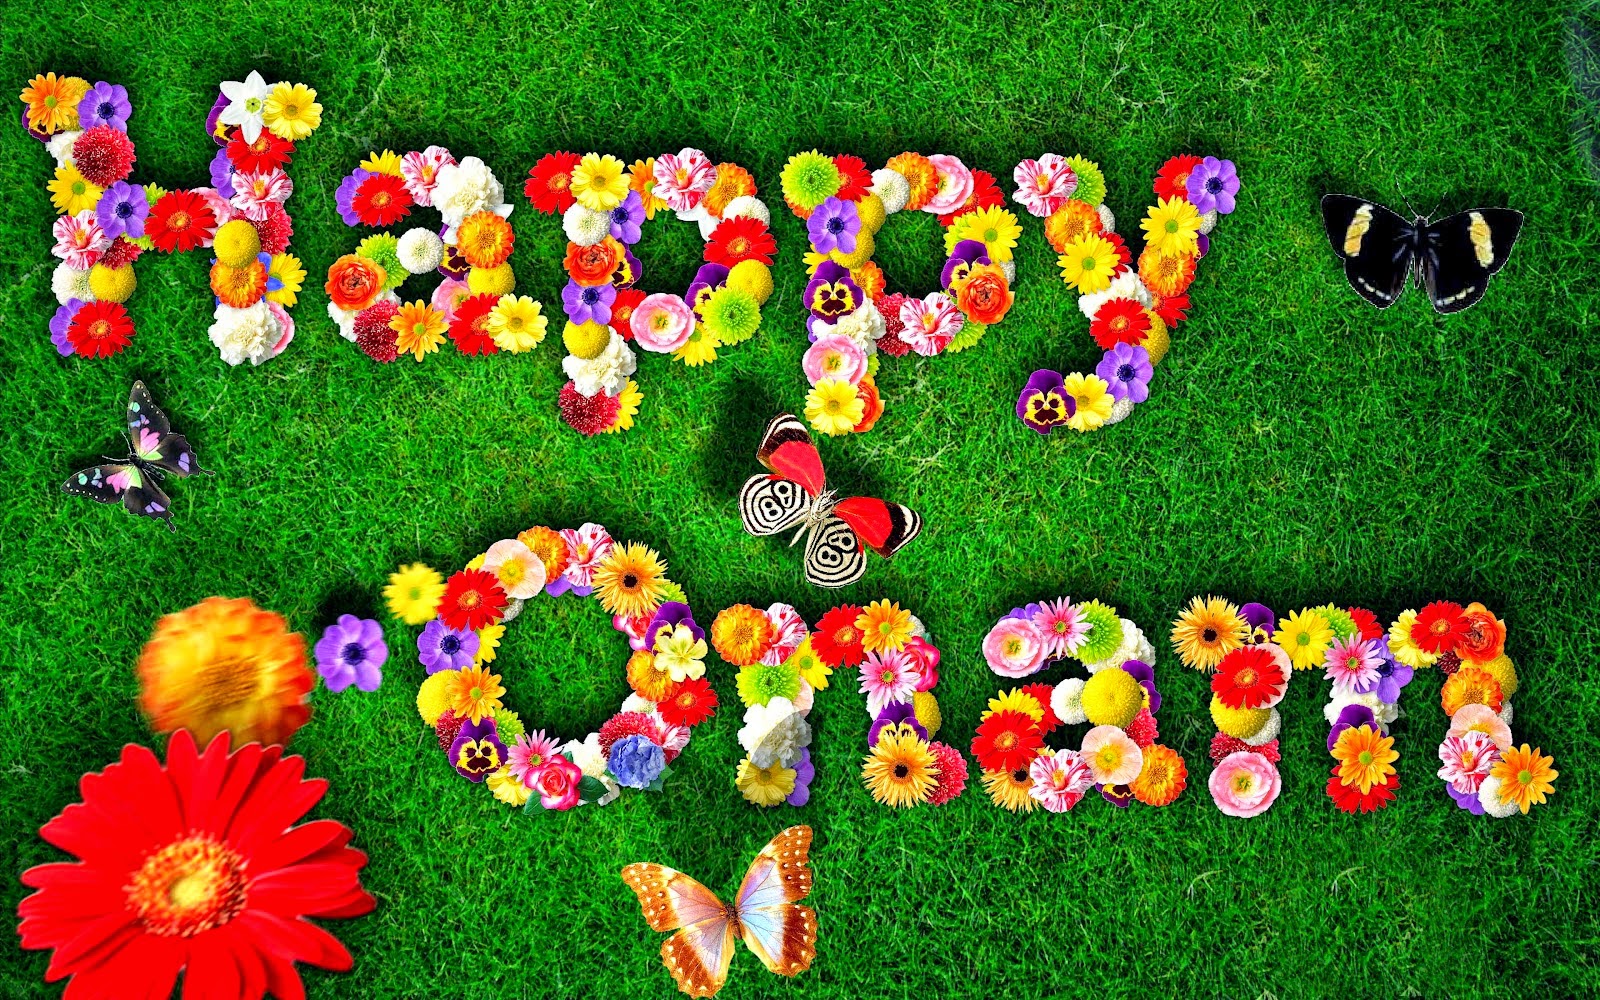 Happy Onam 2015 images with flowes